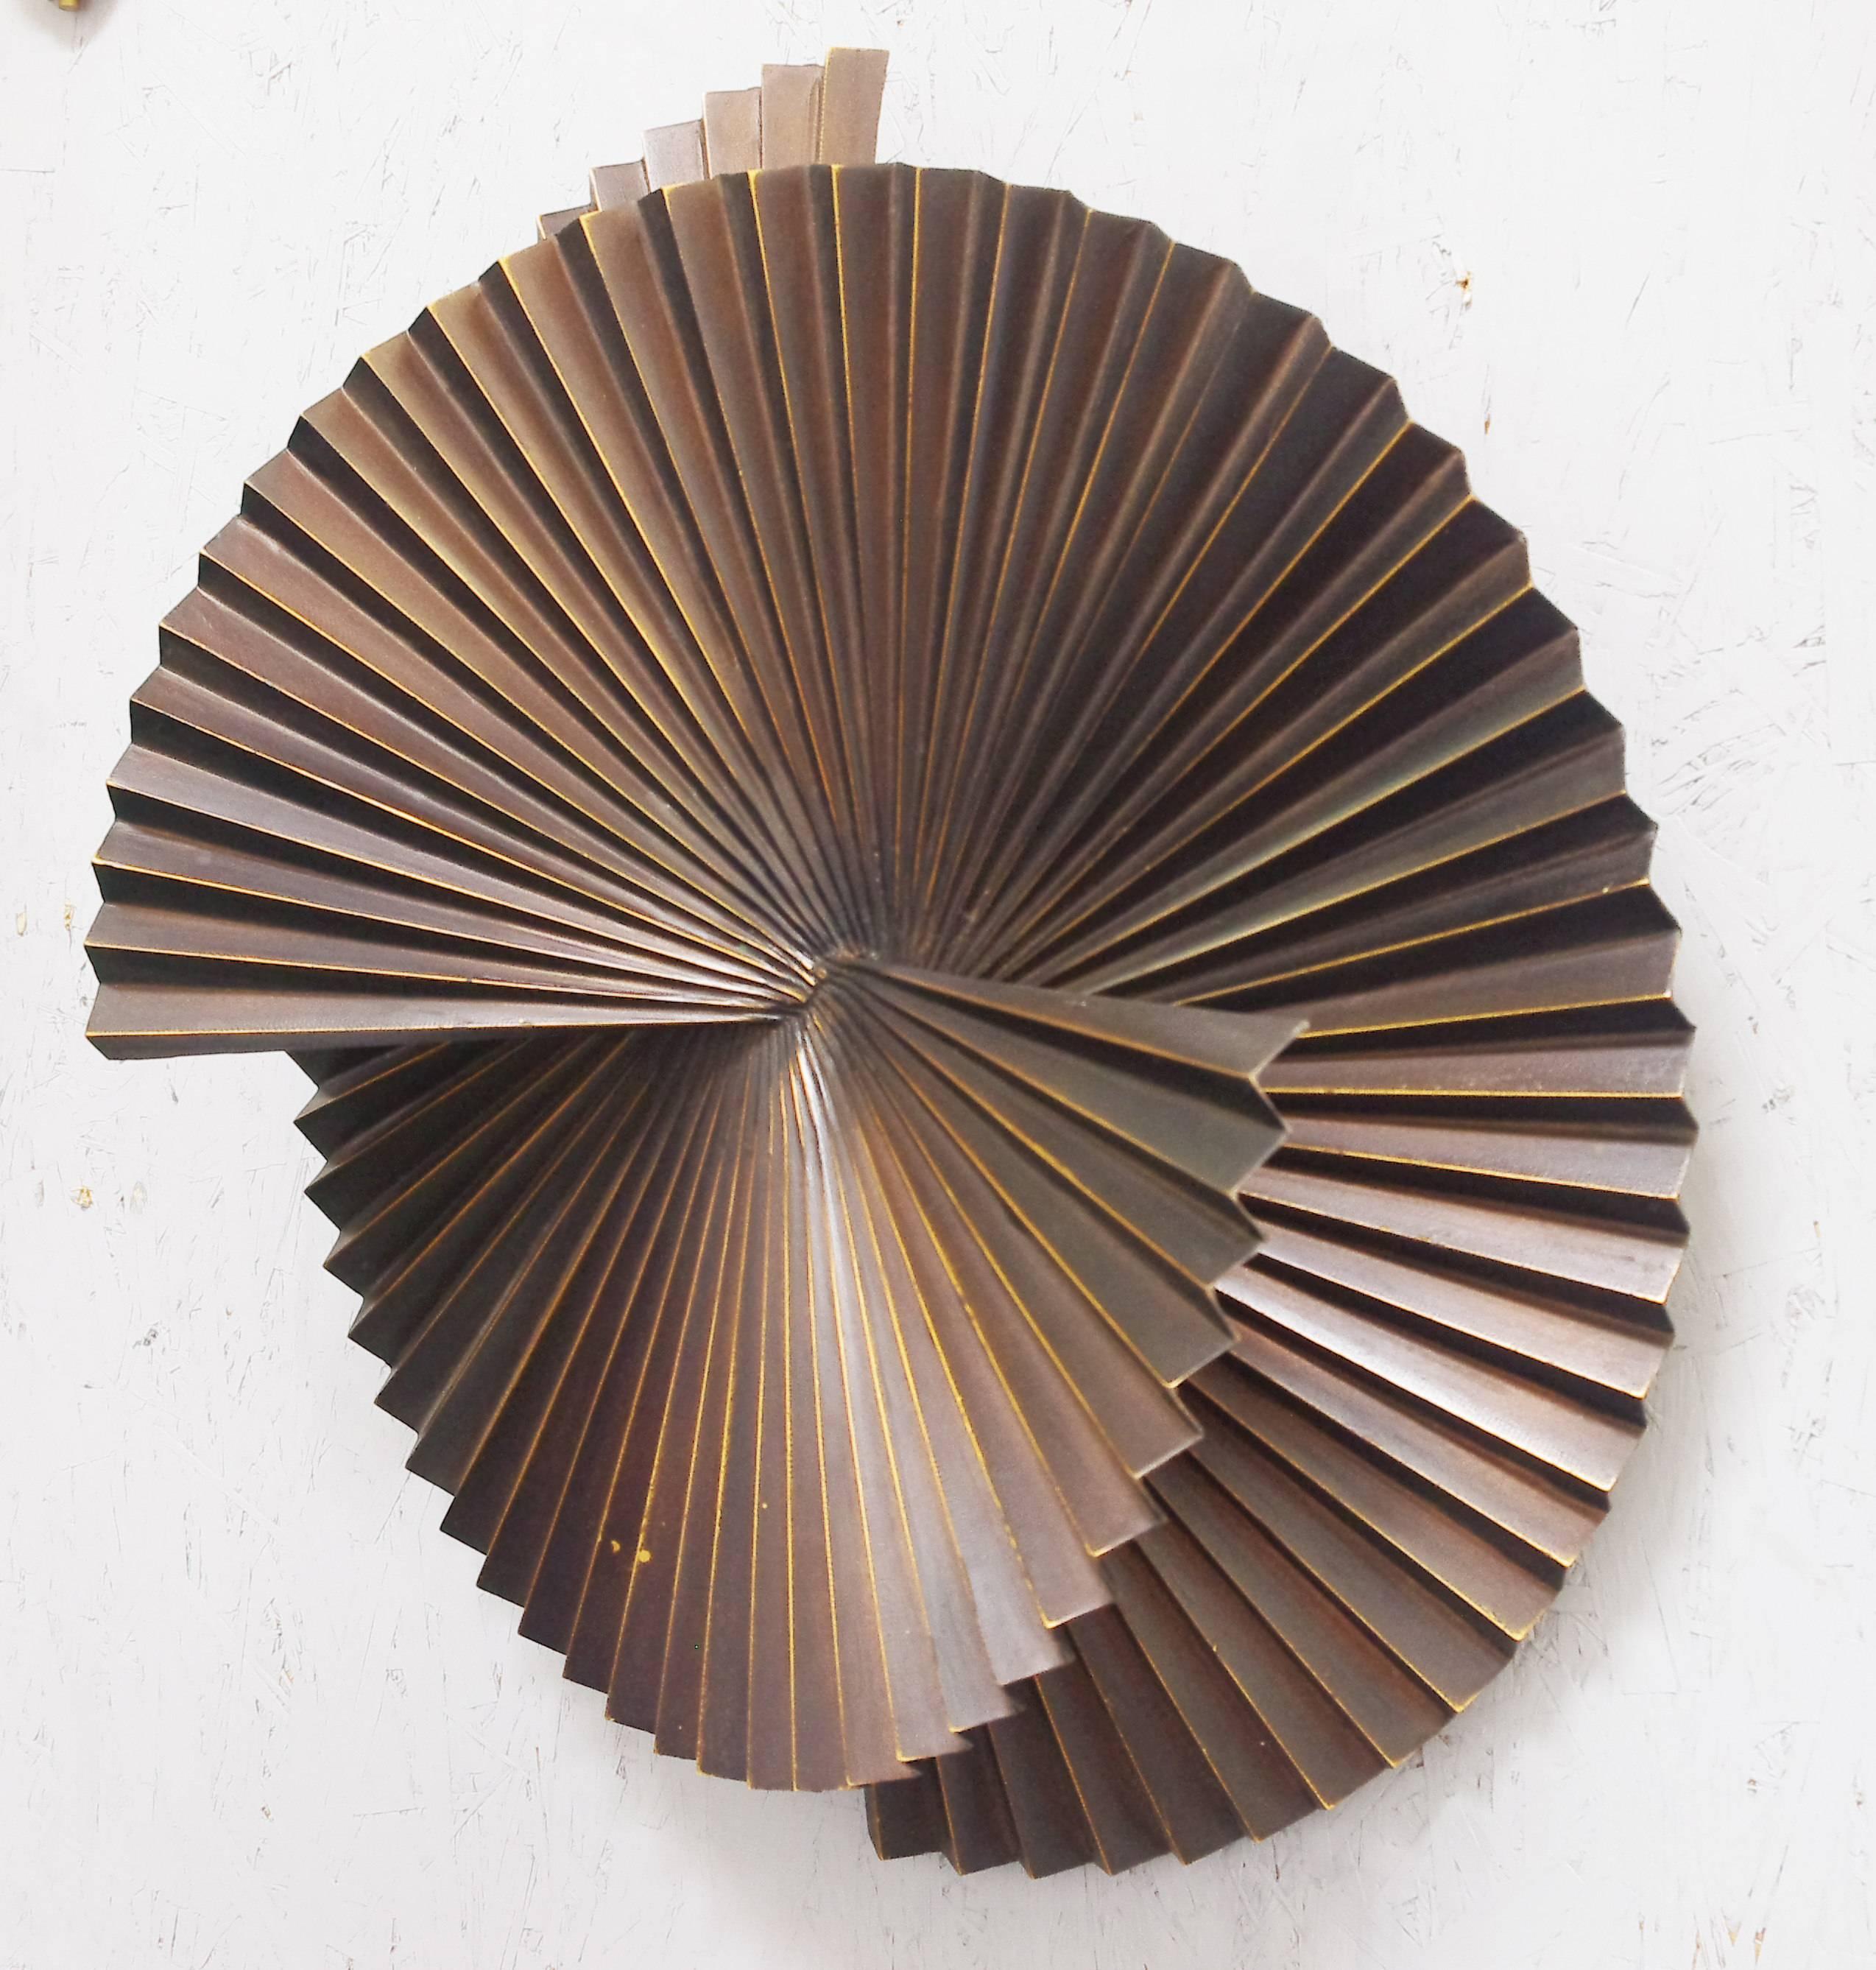 Limited edition large dark bronzed metal sconce or wall sculpture in spiral fan design / Designed by Fabio Bergomi for Fabio Ltd 
1 light / E26 or E27 type / max 60W
Diameter: 28 inches / Depth: 8 inches 
1 in stock in Palm Springs currently ON SALE